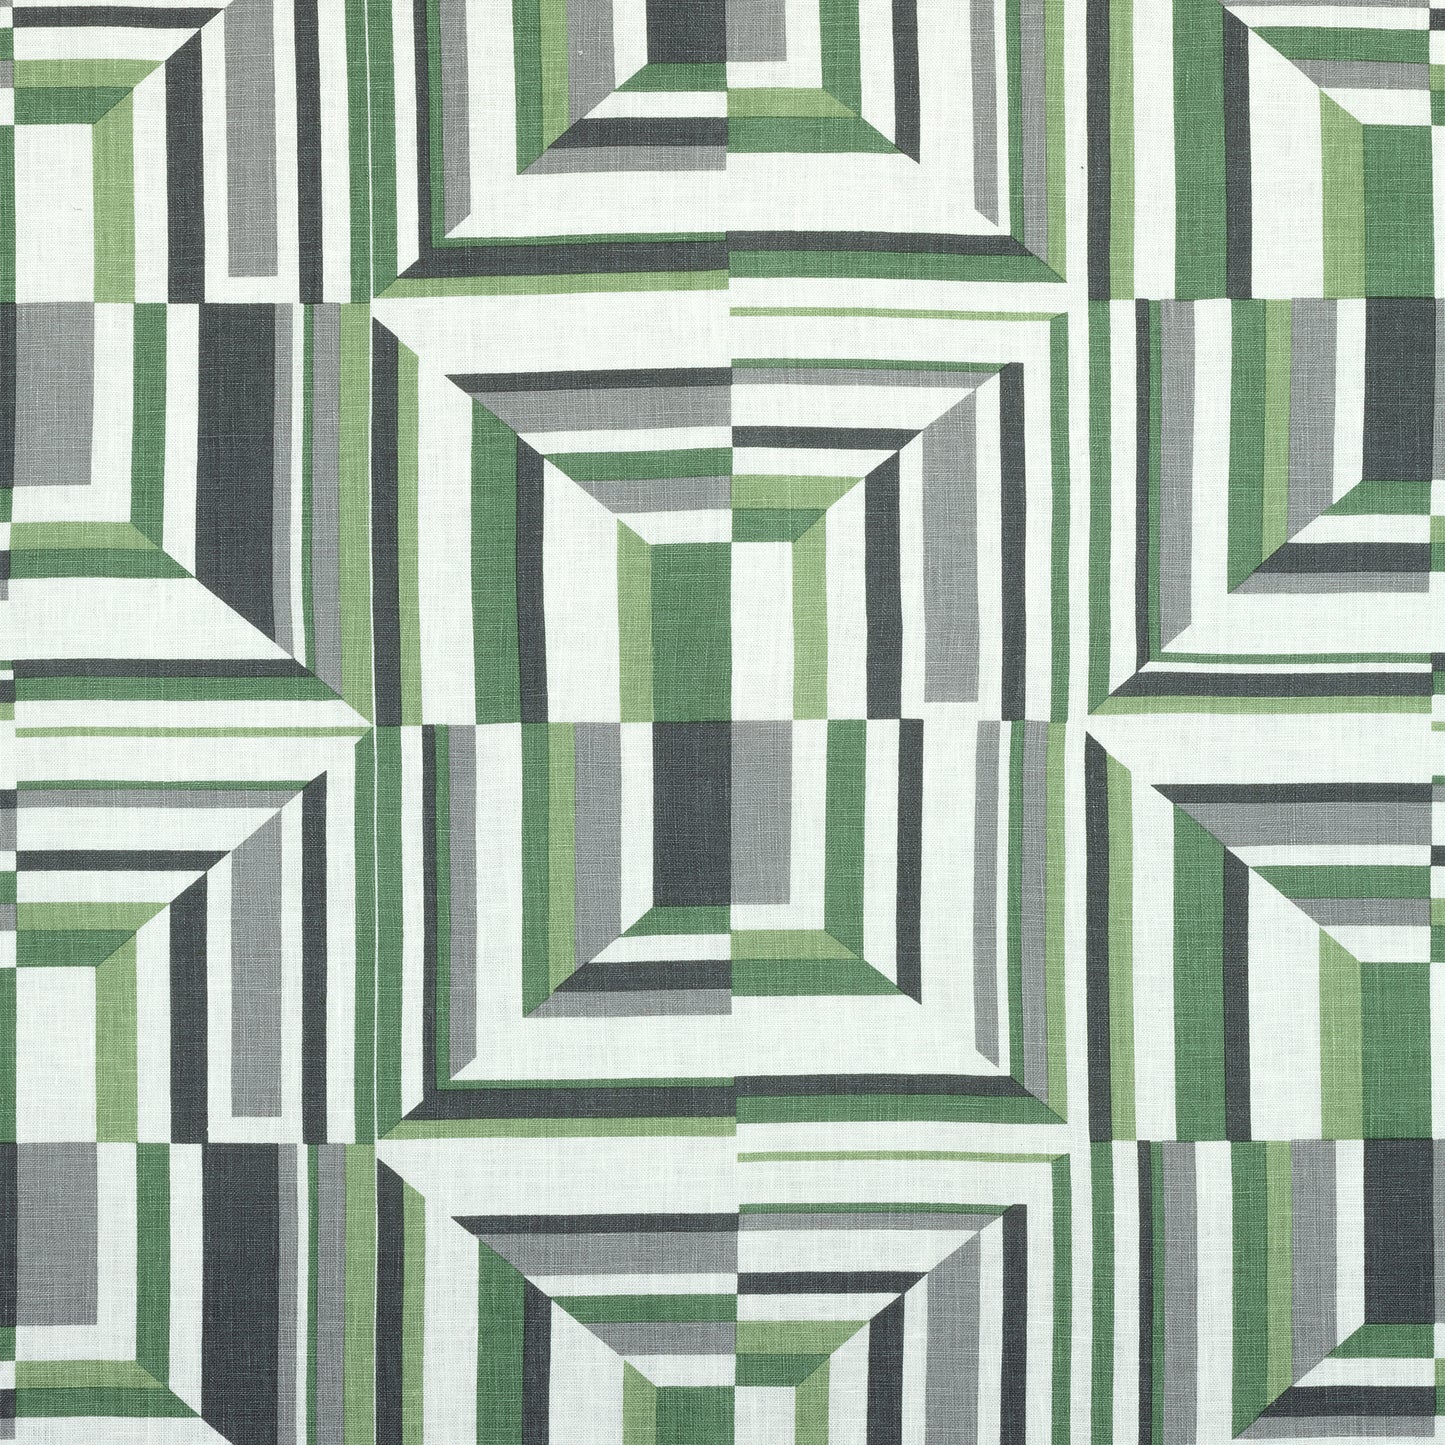 Purchase  Ann French Fabric Pattern number AF9649  pattern name  Cubism